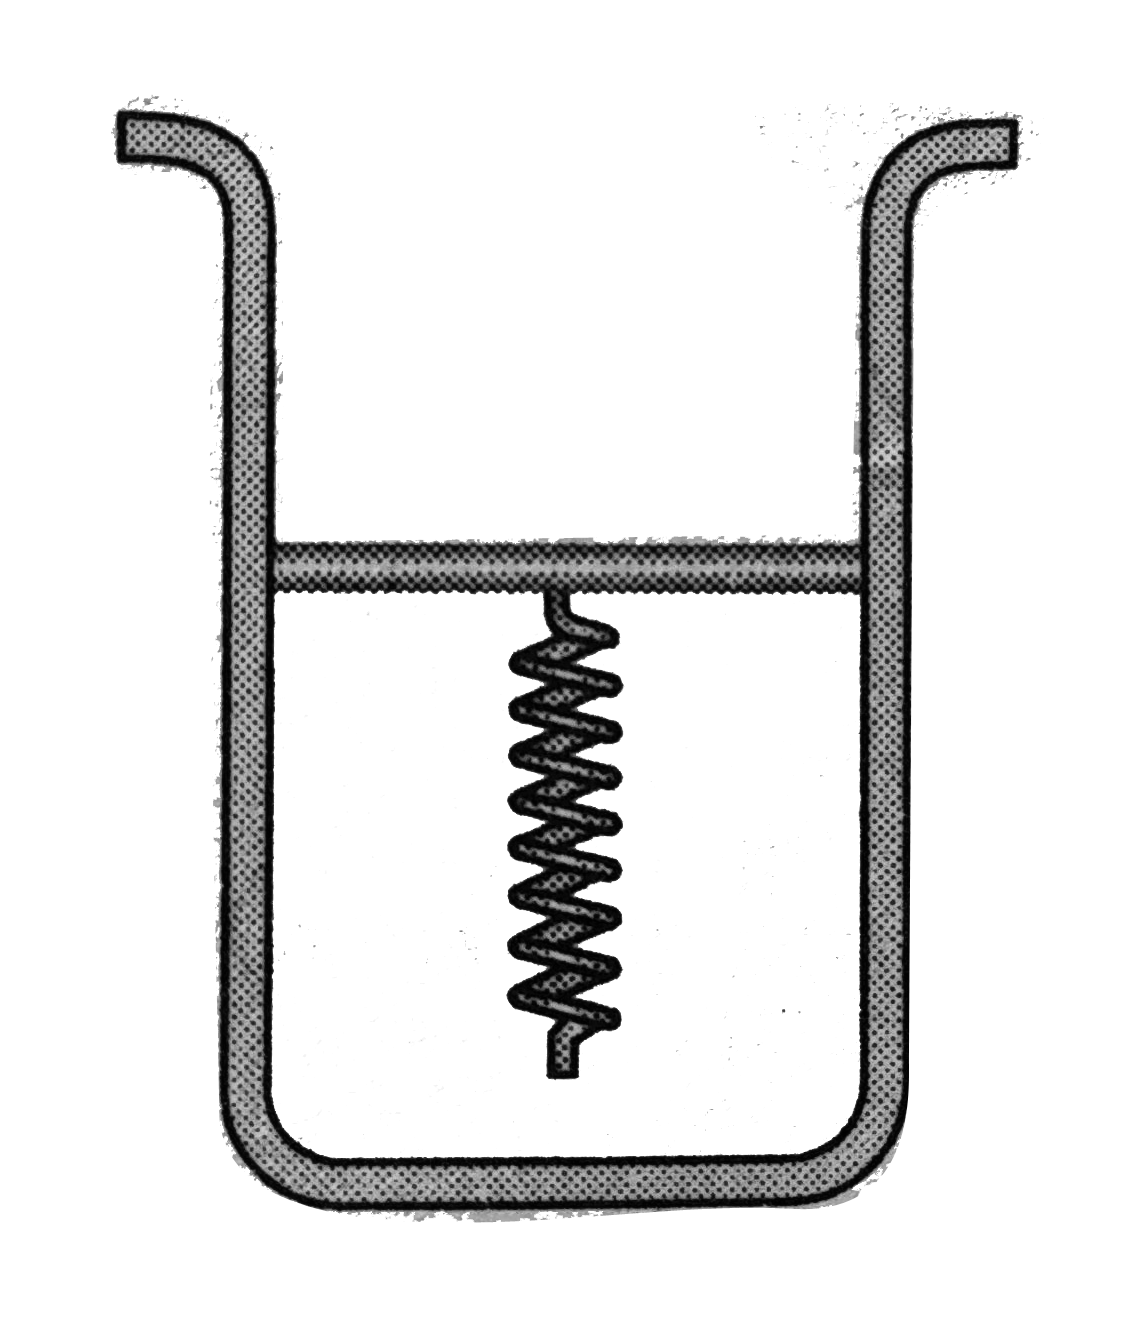 A cylinder is fitted with a piston, beneath which is a spring, as in the figure. The cylinder is open at the top. Friction is absent. The spring is 3600 N//m. The piston has a negligible mass and a radius of 0.025m (a) when air beneath the piston is conpletely pumped out, how much does the atmospheric pressure cause the spring to compress? (b) How much work does the atmospheric pressure do in compressing the spring?